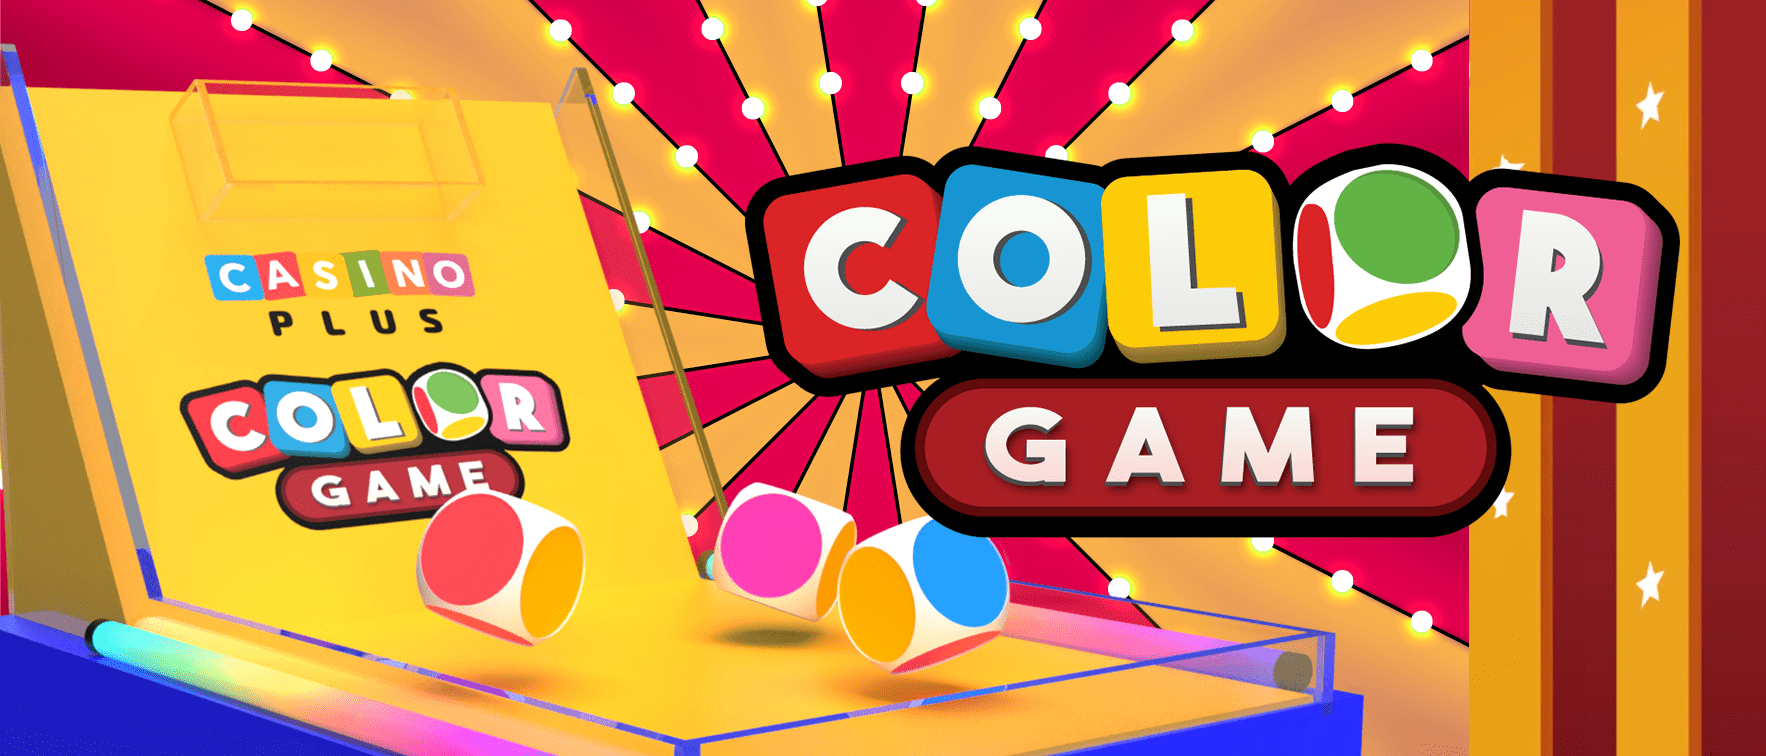 Casino Plus Color Game Betting Odds CG01-24070716 July 07 2024